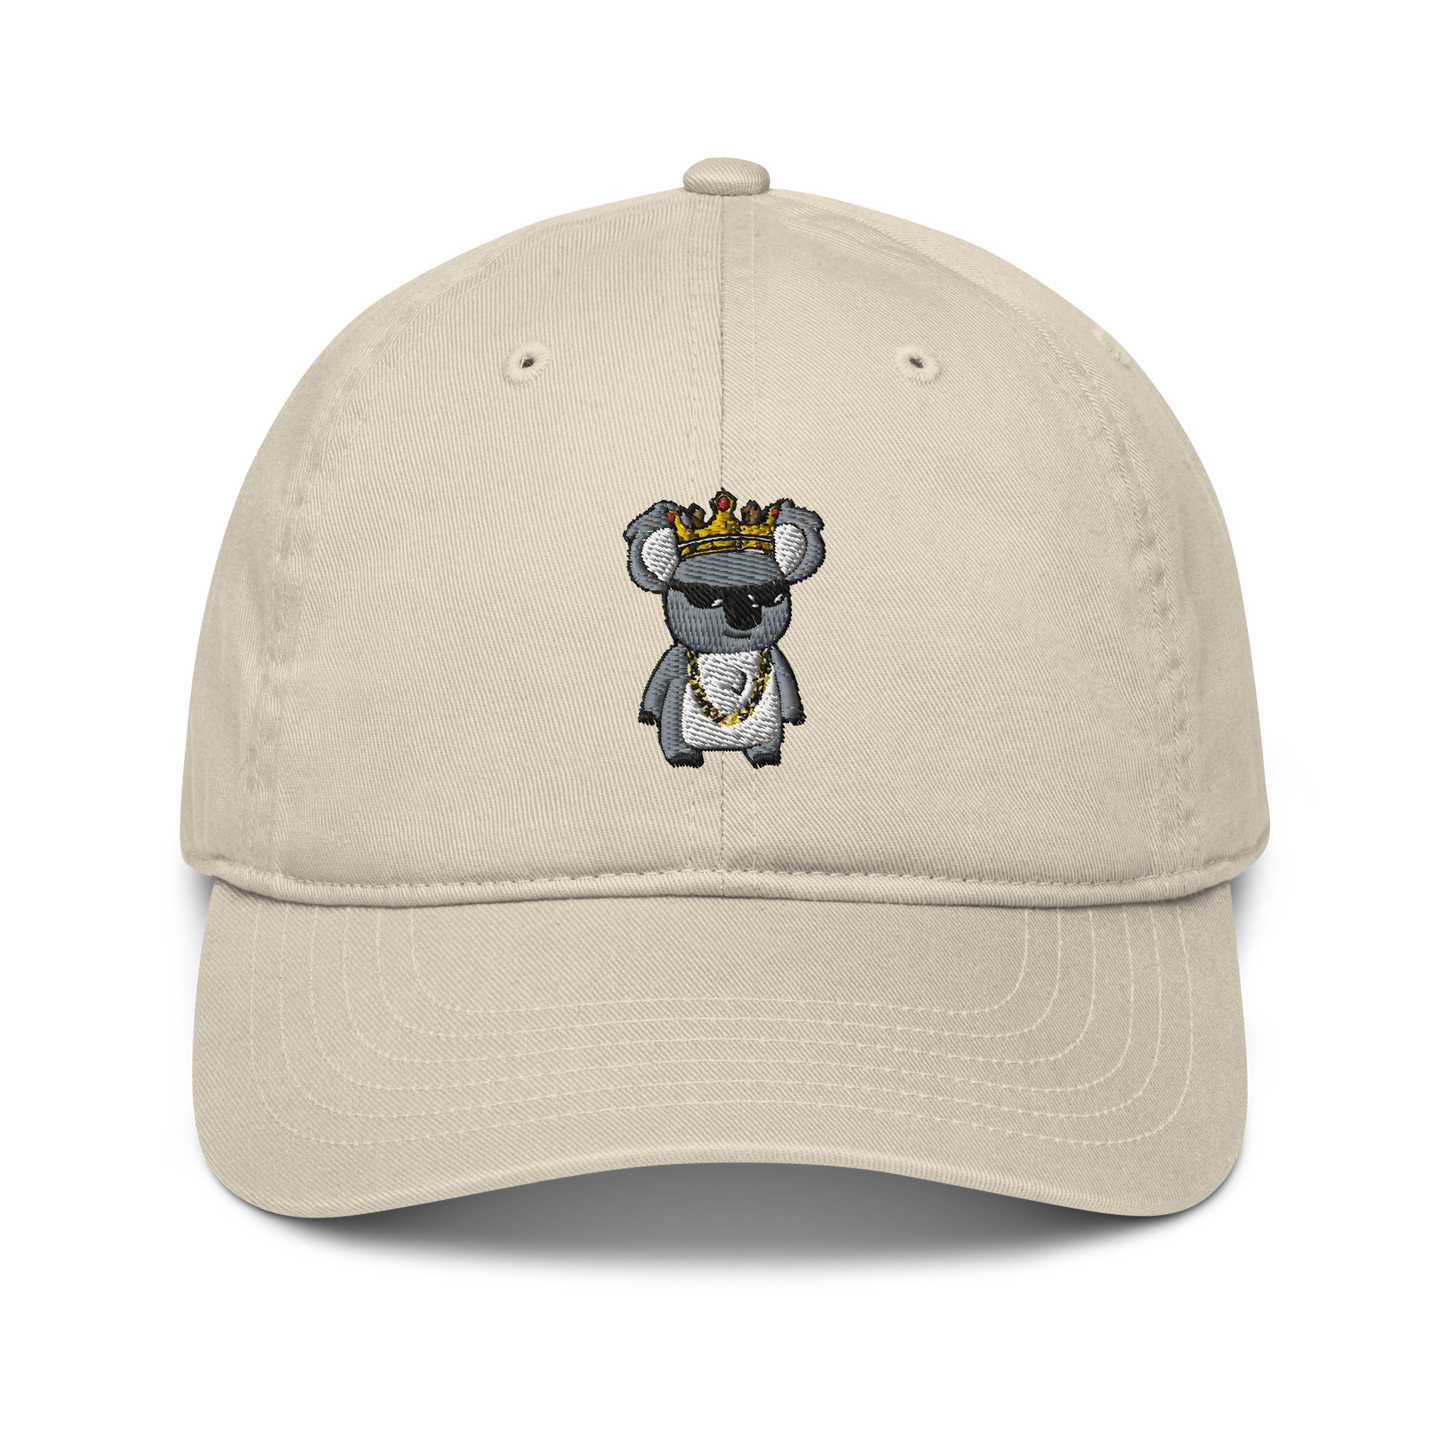 feat K-Dude Club - Organic dad hat (embroidered)